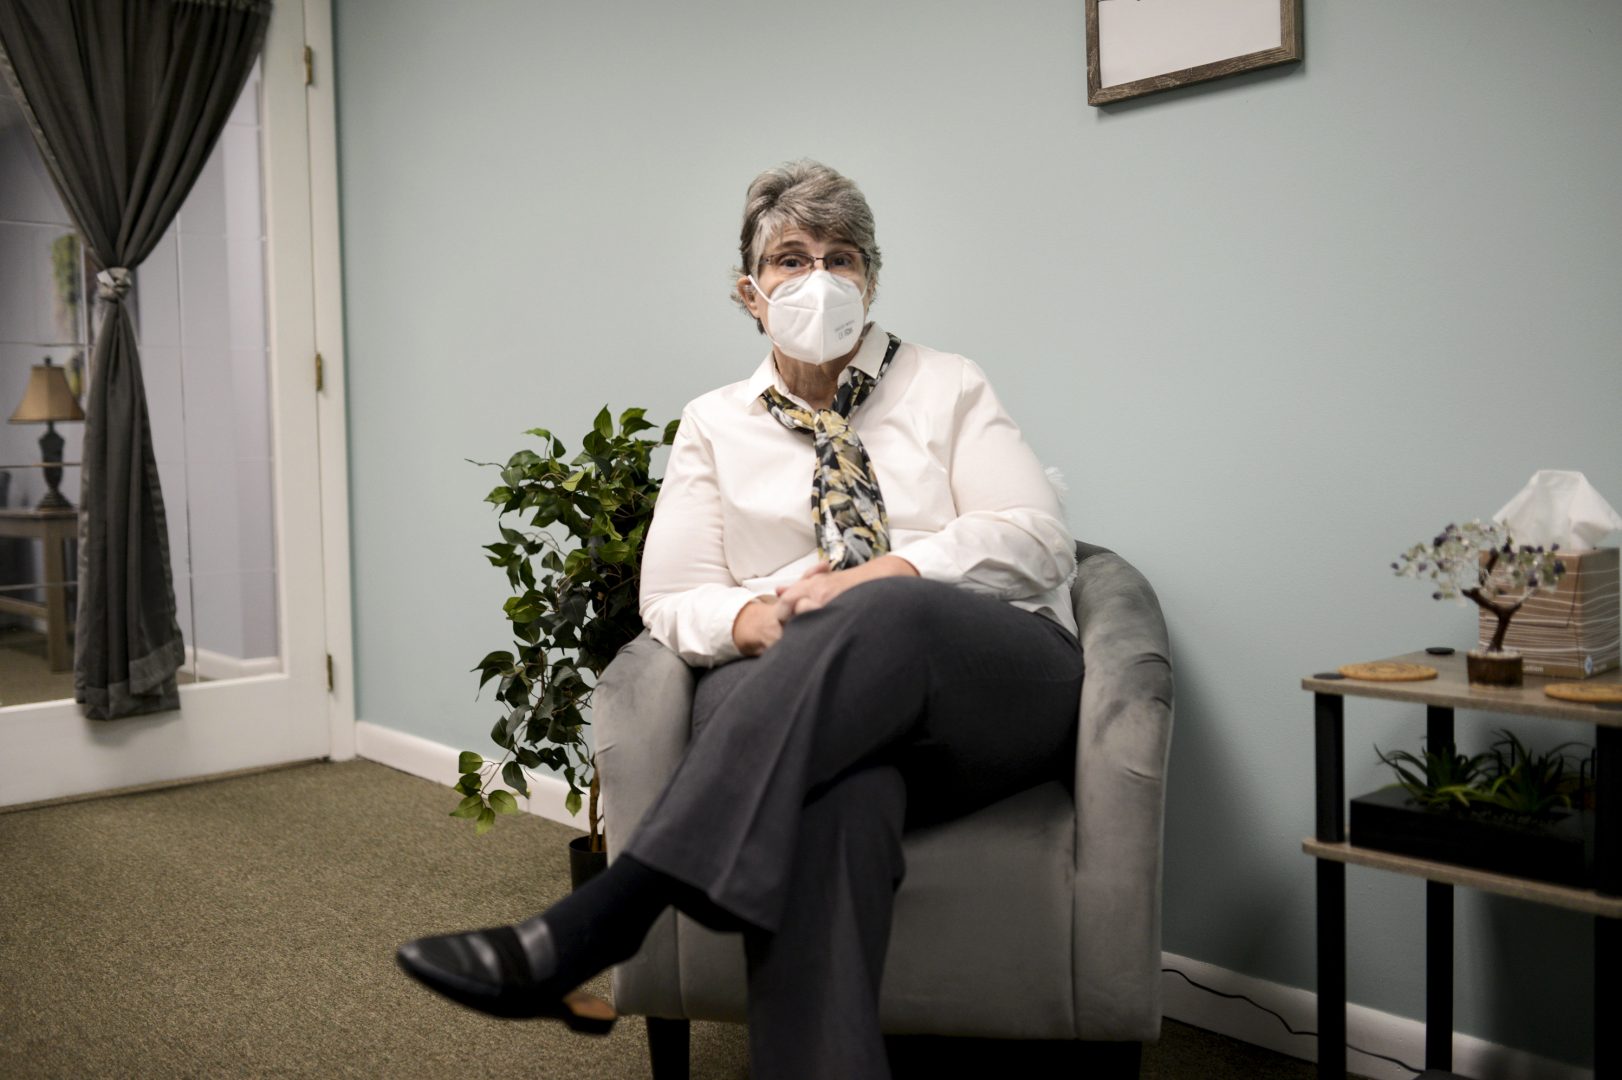 Jodee Pineau-Chaisson sits in her office in Springfield, Mass. on January 12, 2021. Pineau-Chaisson, a social worker, contracted the coronavirus last May and continues to have symptoms even months after testing negative for the virus.